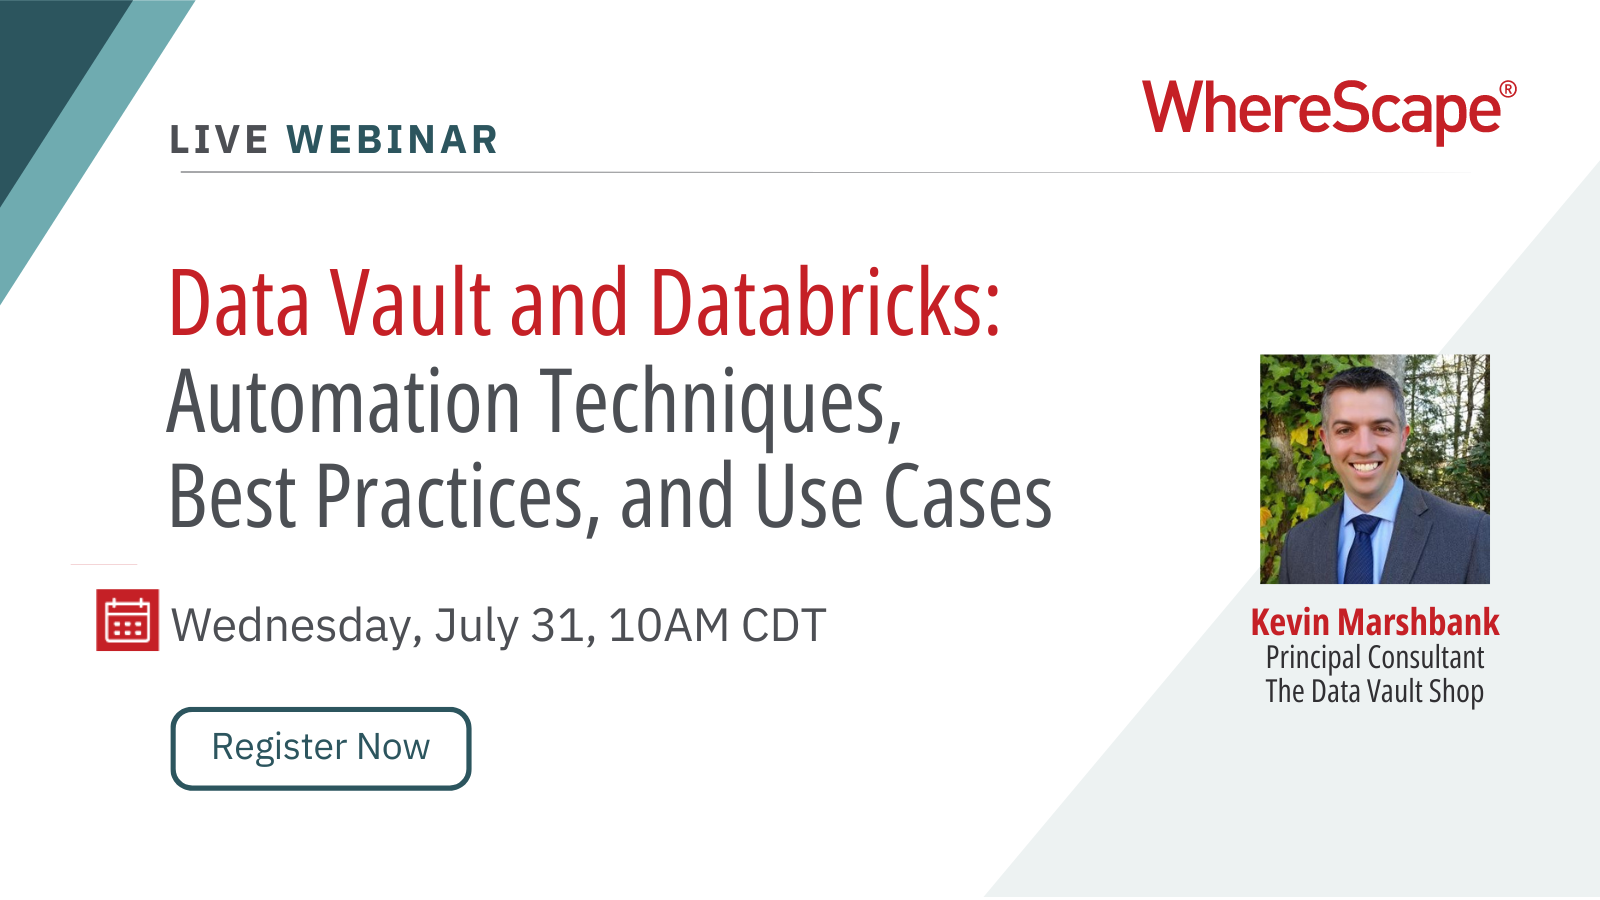 Data Vault and Databricks: Automation Techniques, Best Practices, and Use Cases